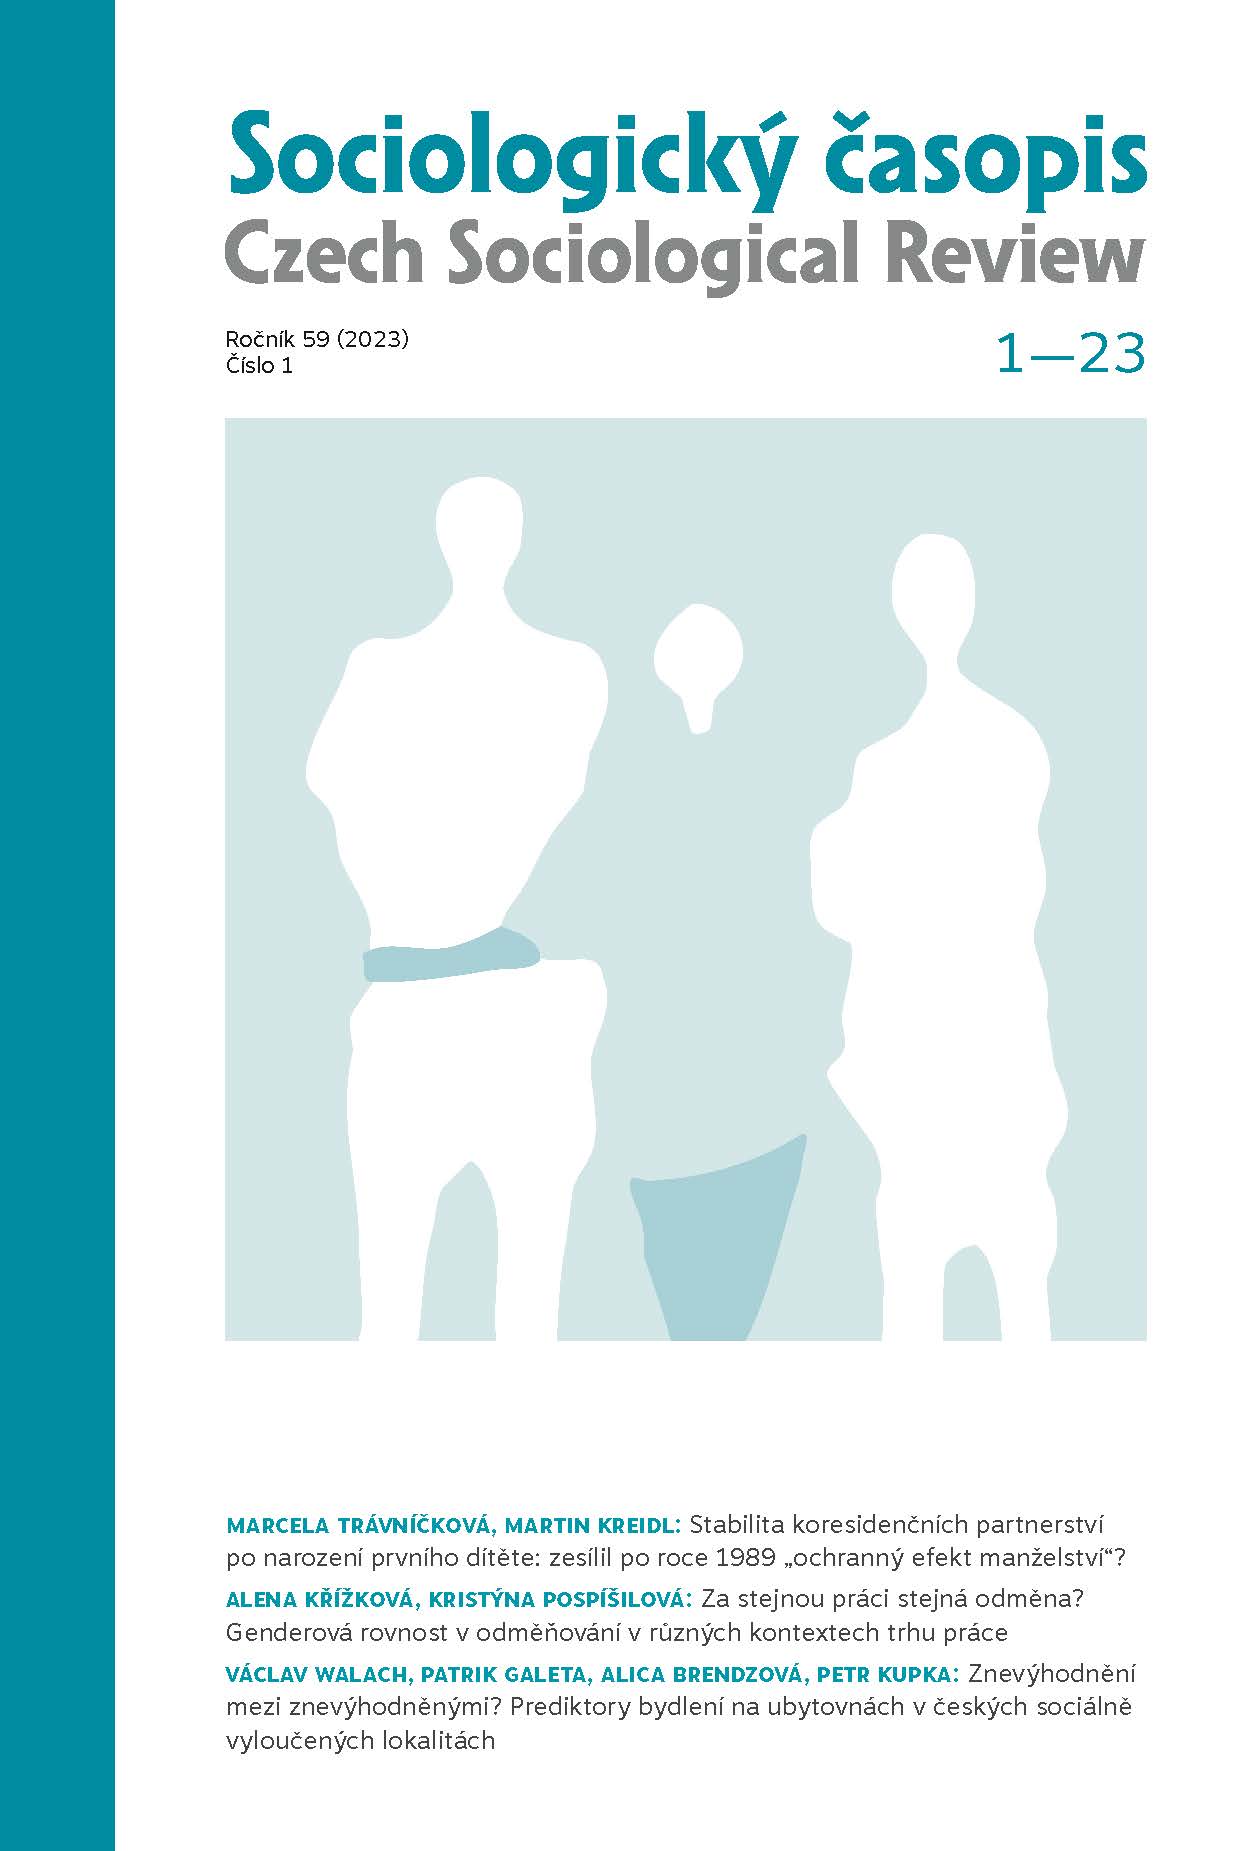 Are All Disadvantaged Equal? Predictors of Living in Hostels in Czech Socially Excluded Localities Cover Image